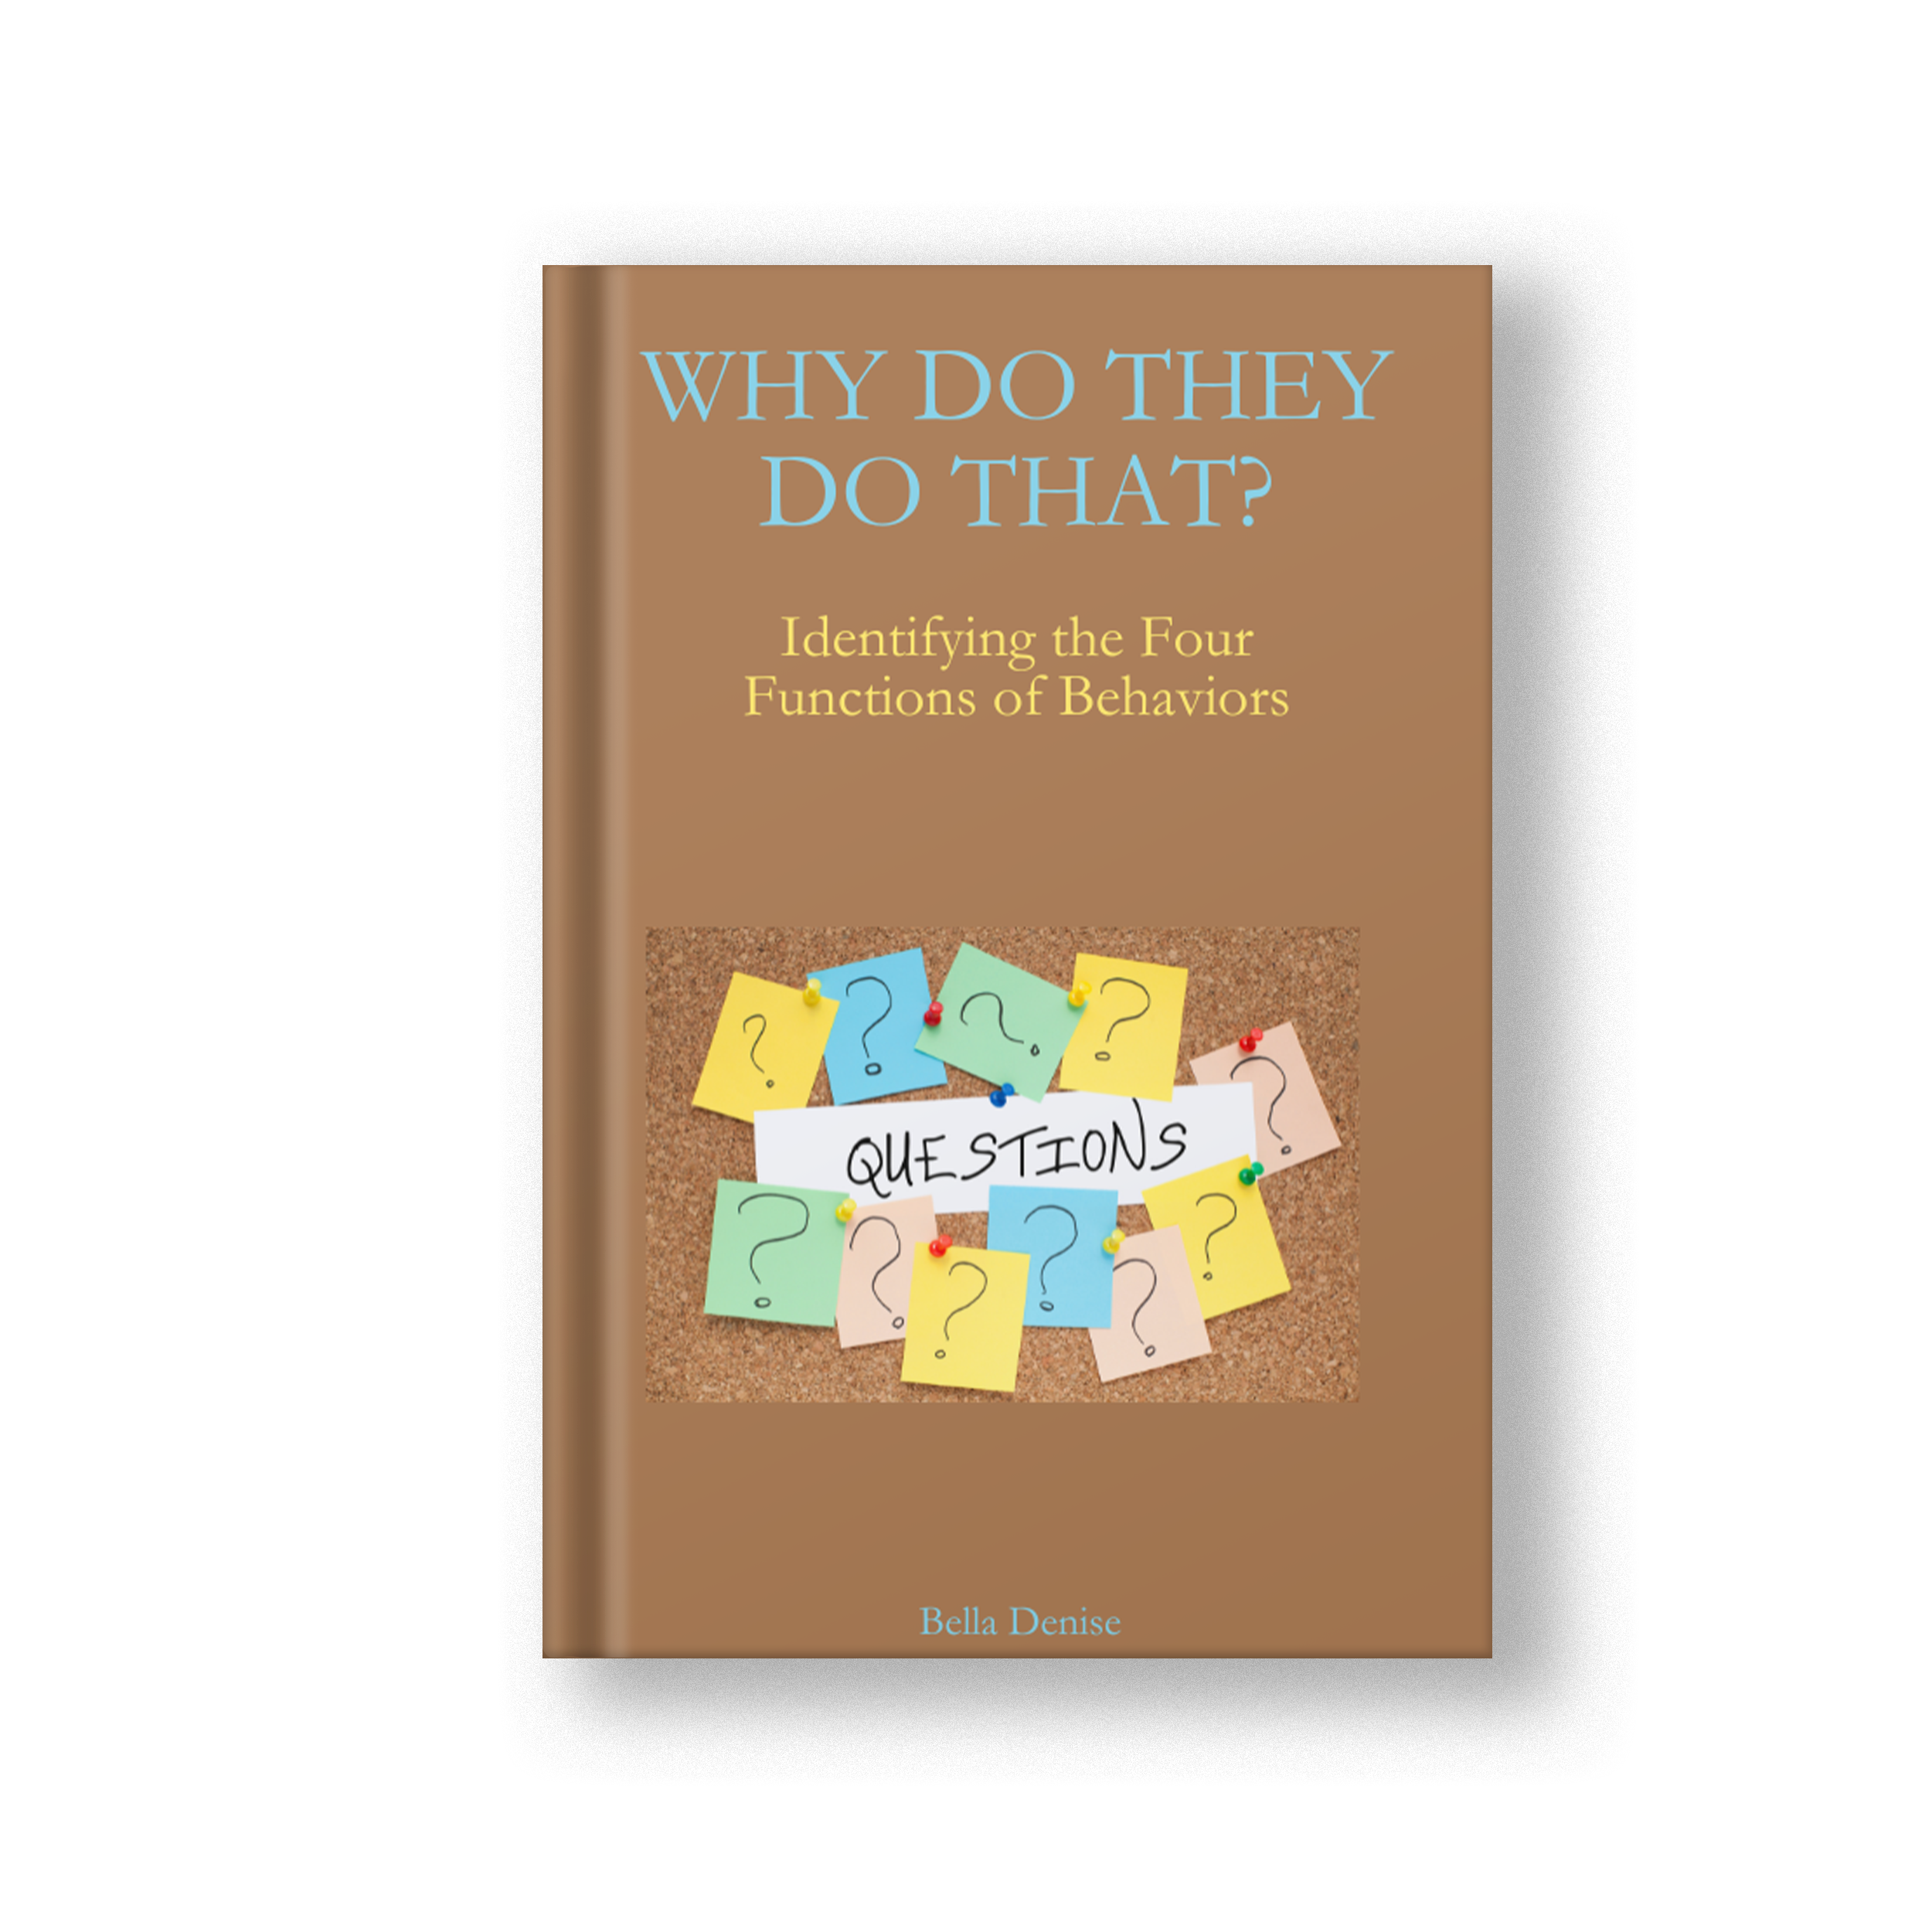 Why Do They Do That? Understanding Behavior with Four Functions (eBook)